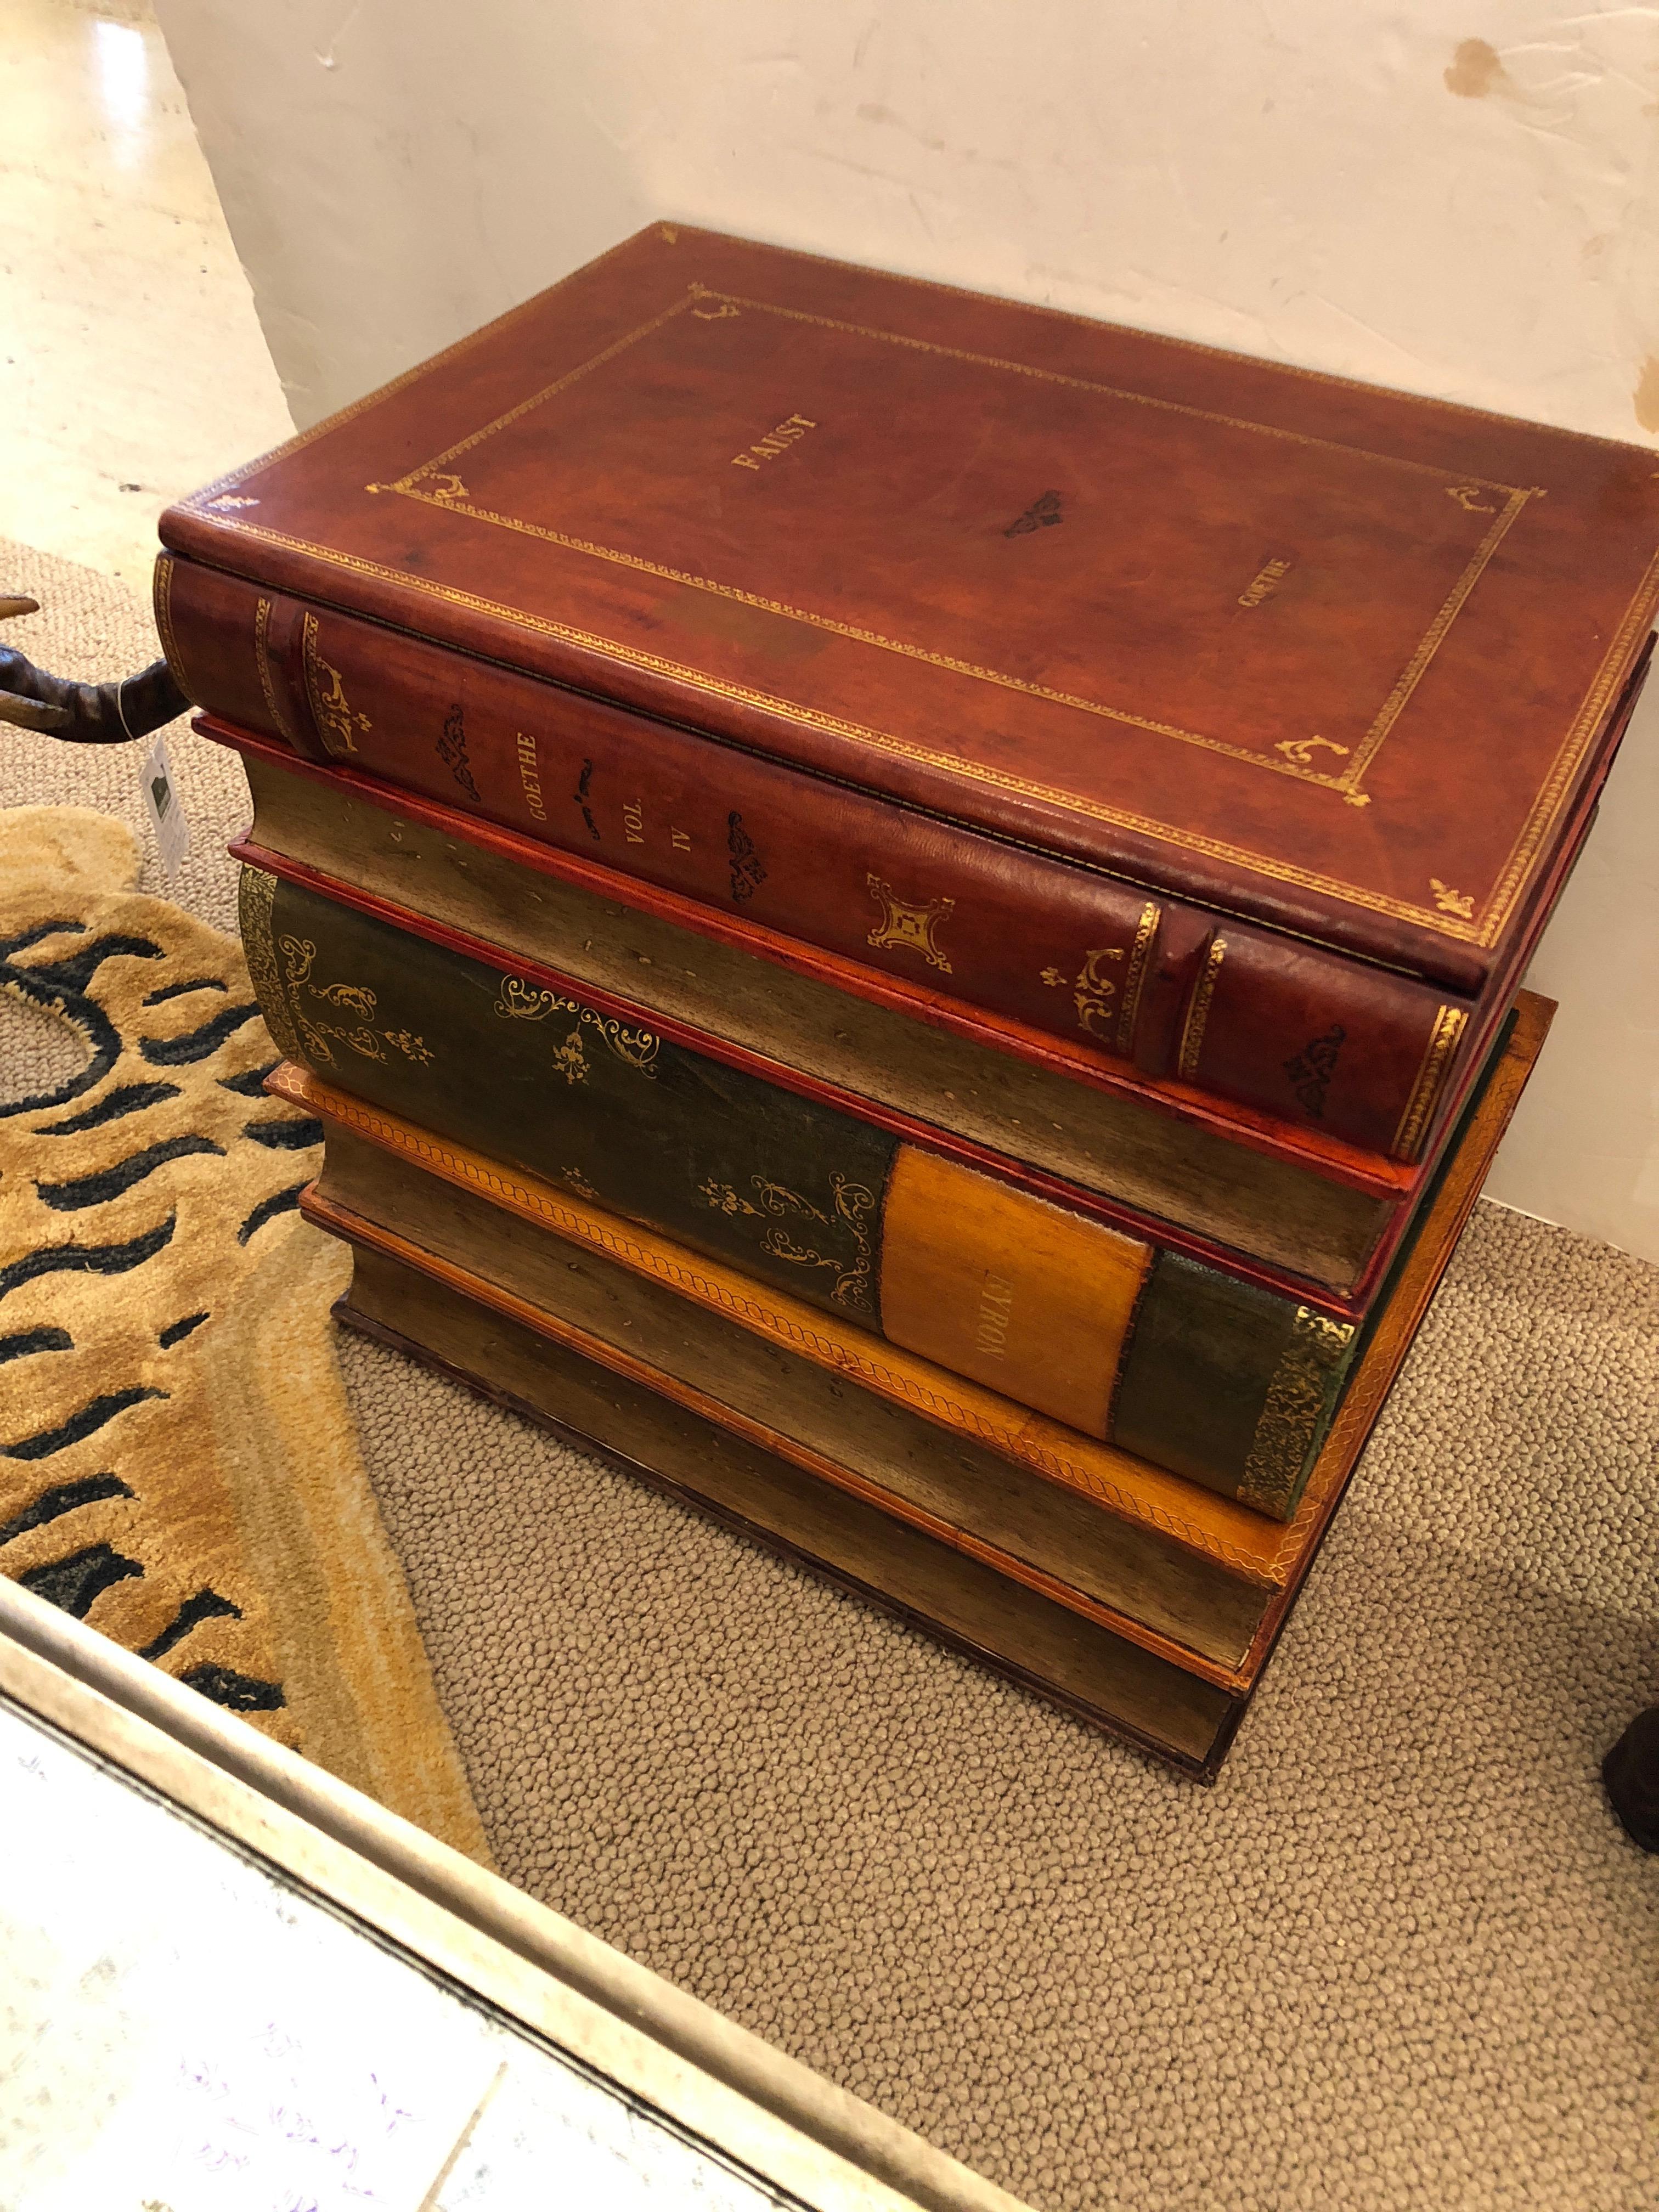 Stunning gilt and leather bound stacked book form table with lift up top revealing a storage compartment and single drawer. Green and white Italian papered interior.
 